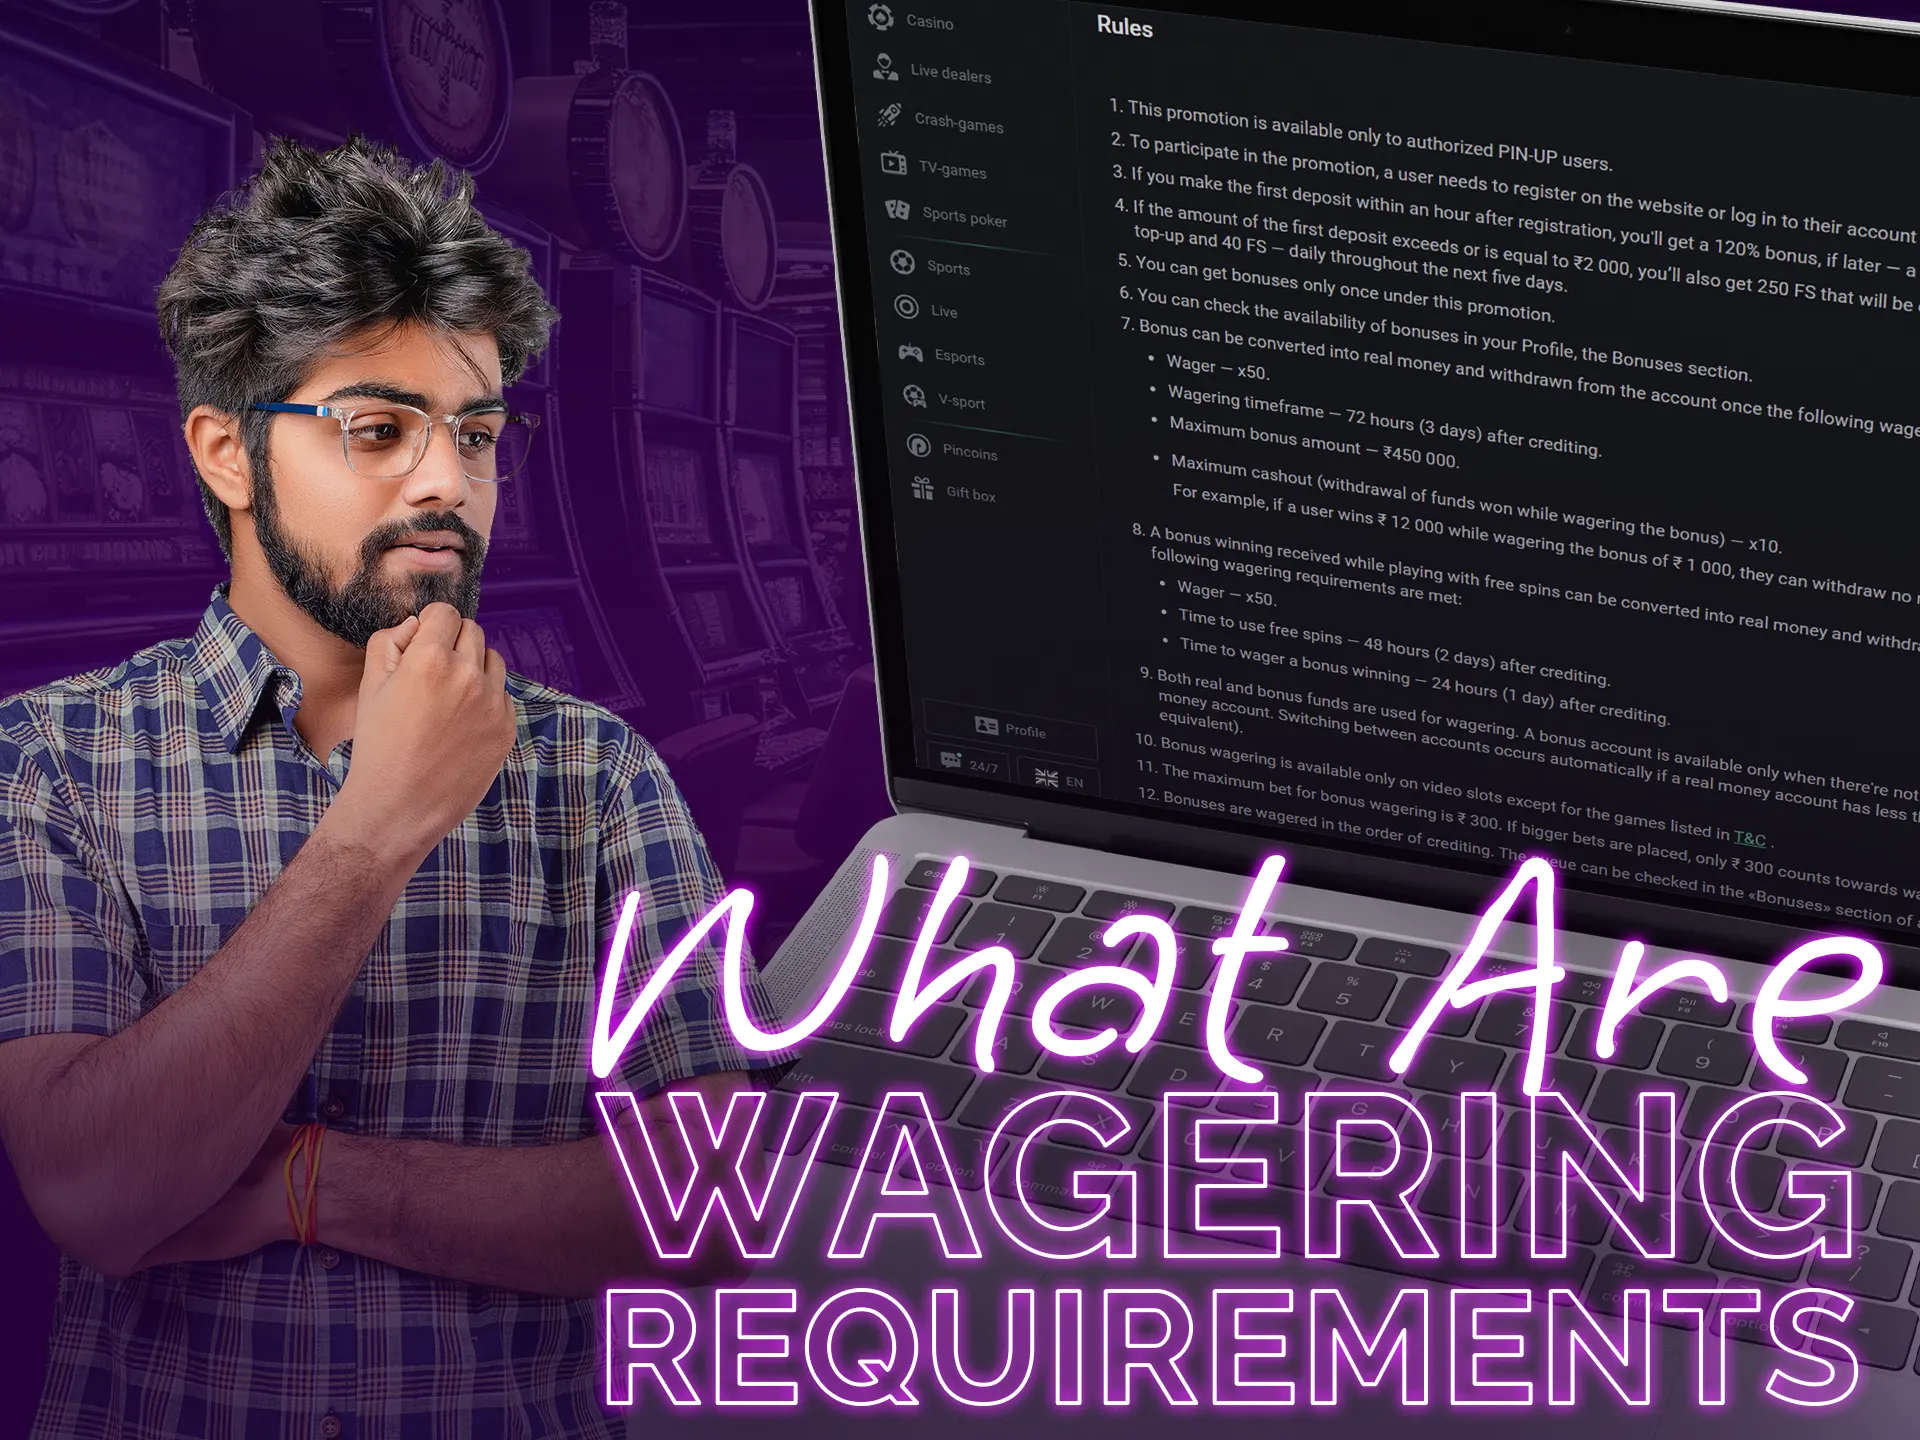 Wagering requirements explained for withdrawing online casino bonus funds.